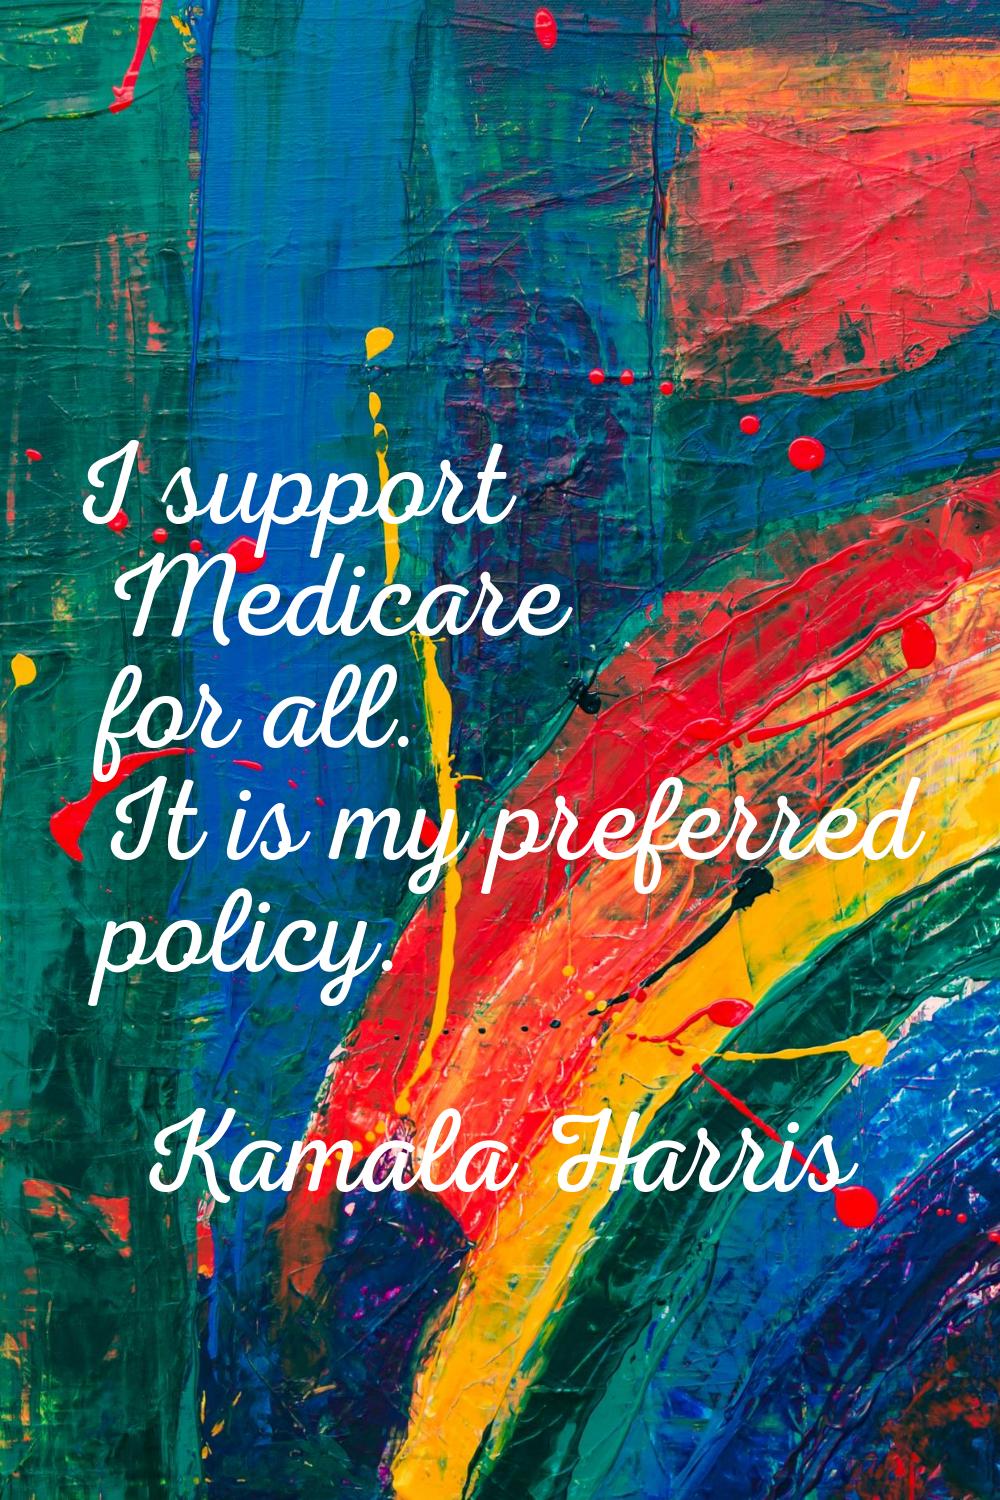 I support Medicare for all. It is my preferred policy.